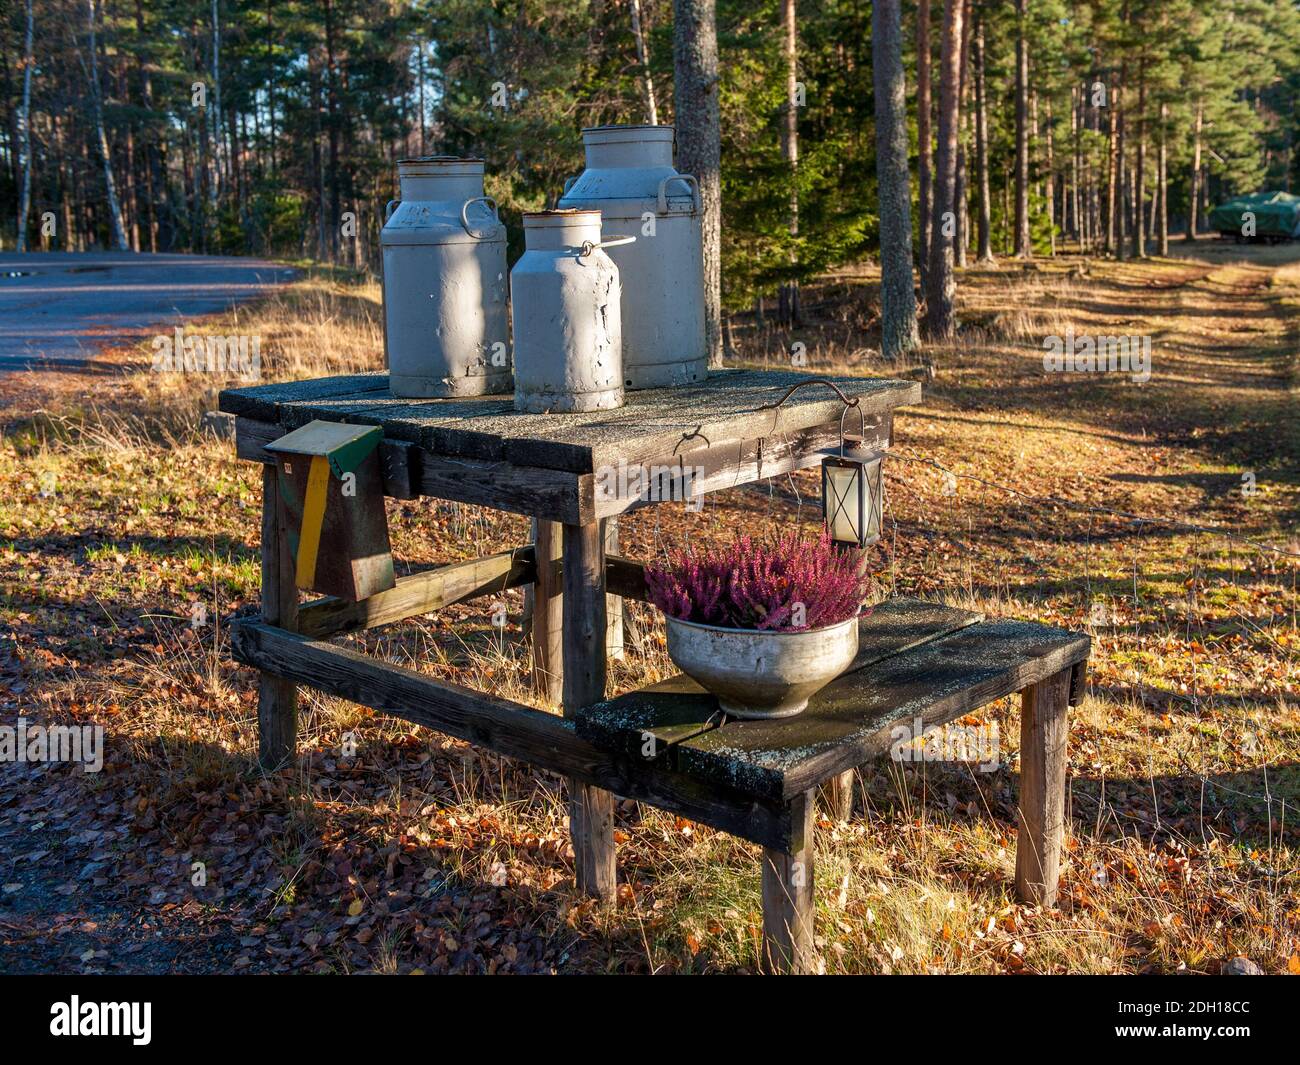 Traditional milk churn stand maintained for decorative purposes along a country road in county Ostergotland of Sweden Stock Photo